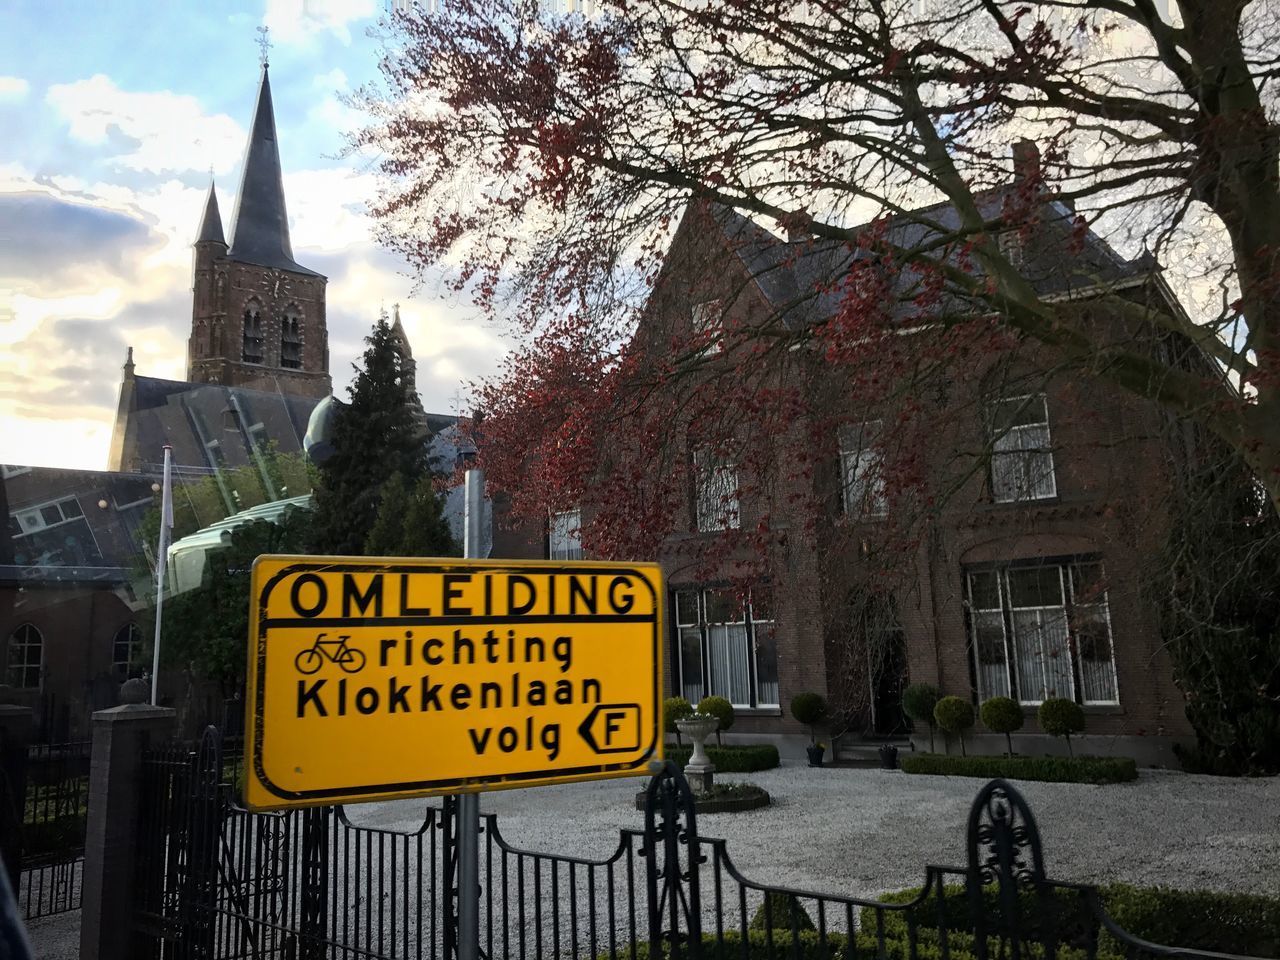 INFORMATION SIGN ON STREET AGAINST BUILDINGS